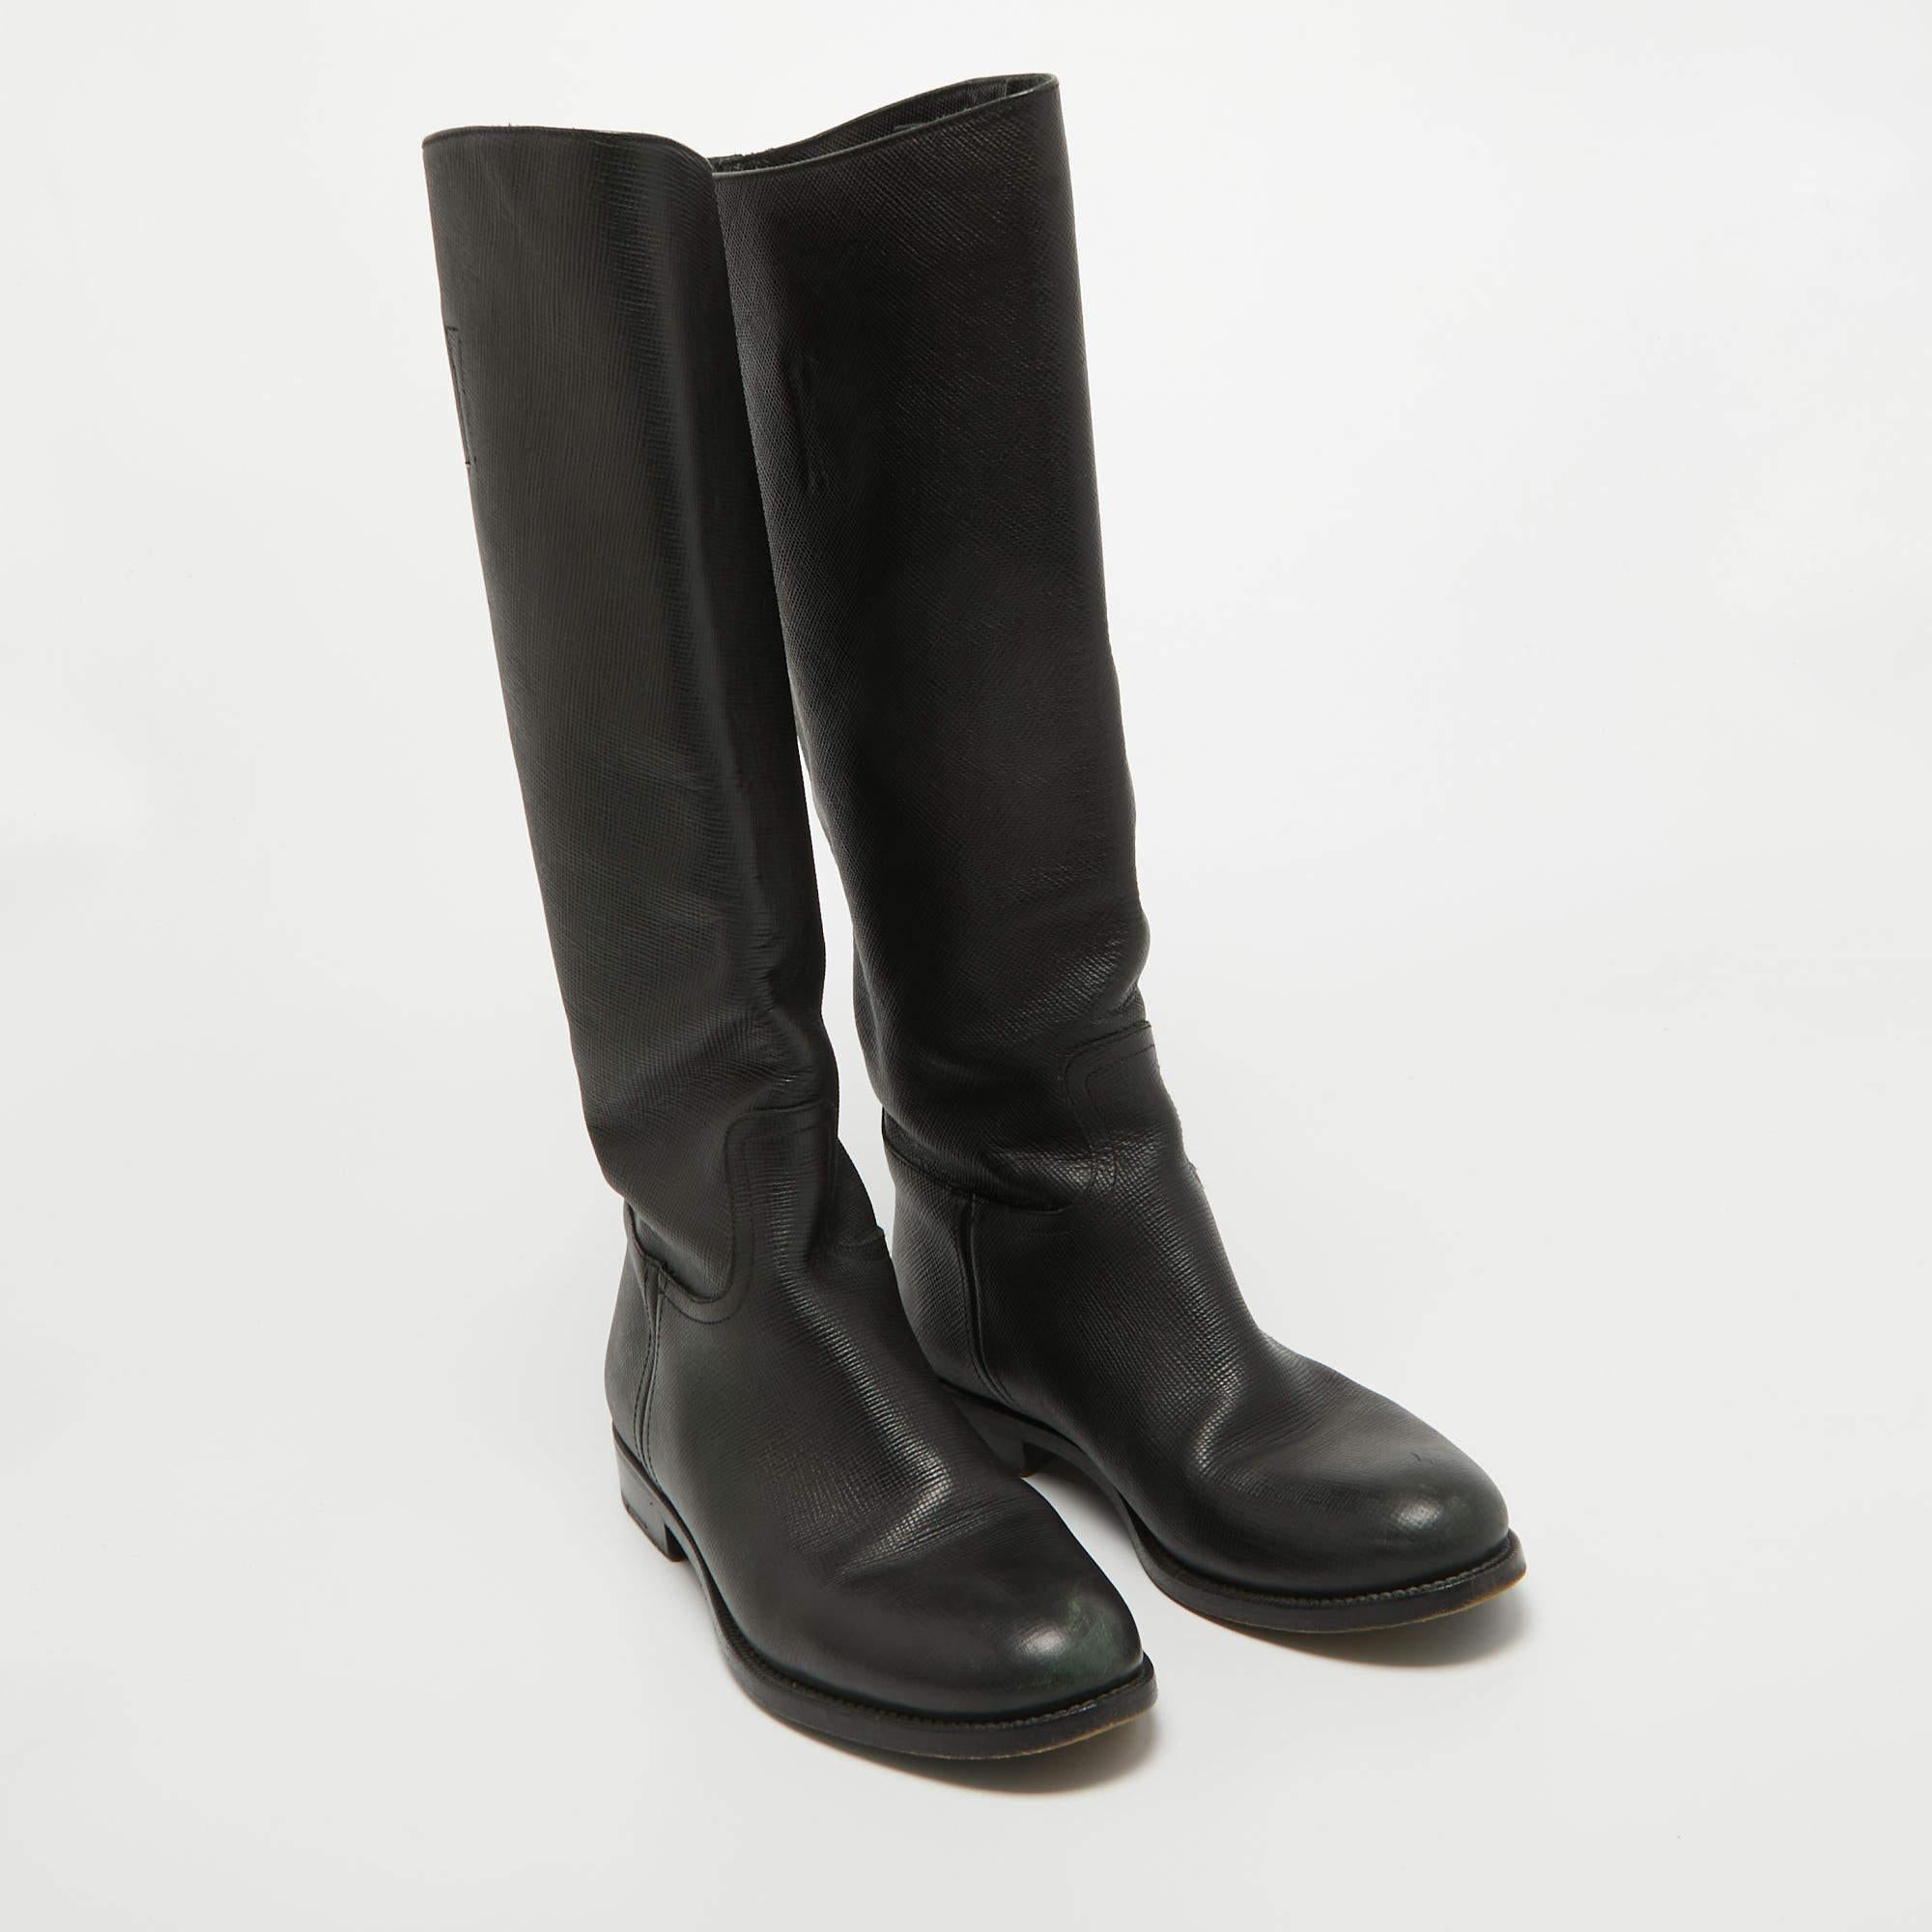 Prada Black Leather Knee Length Boots Size 39 For Sale 4